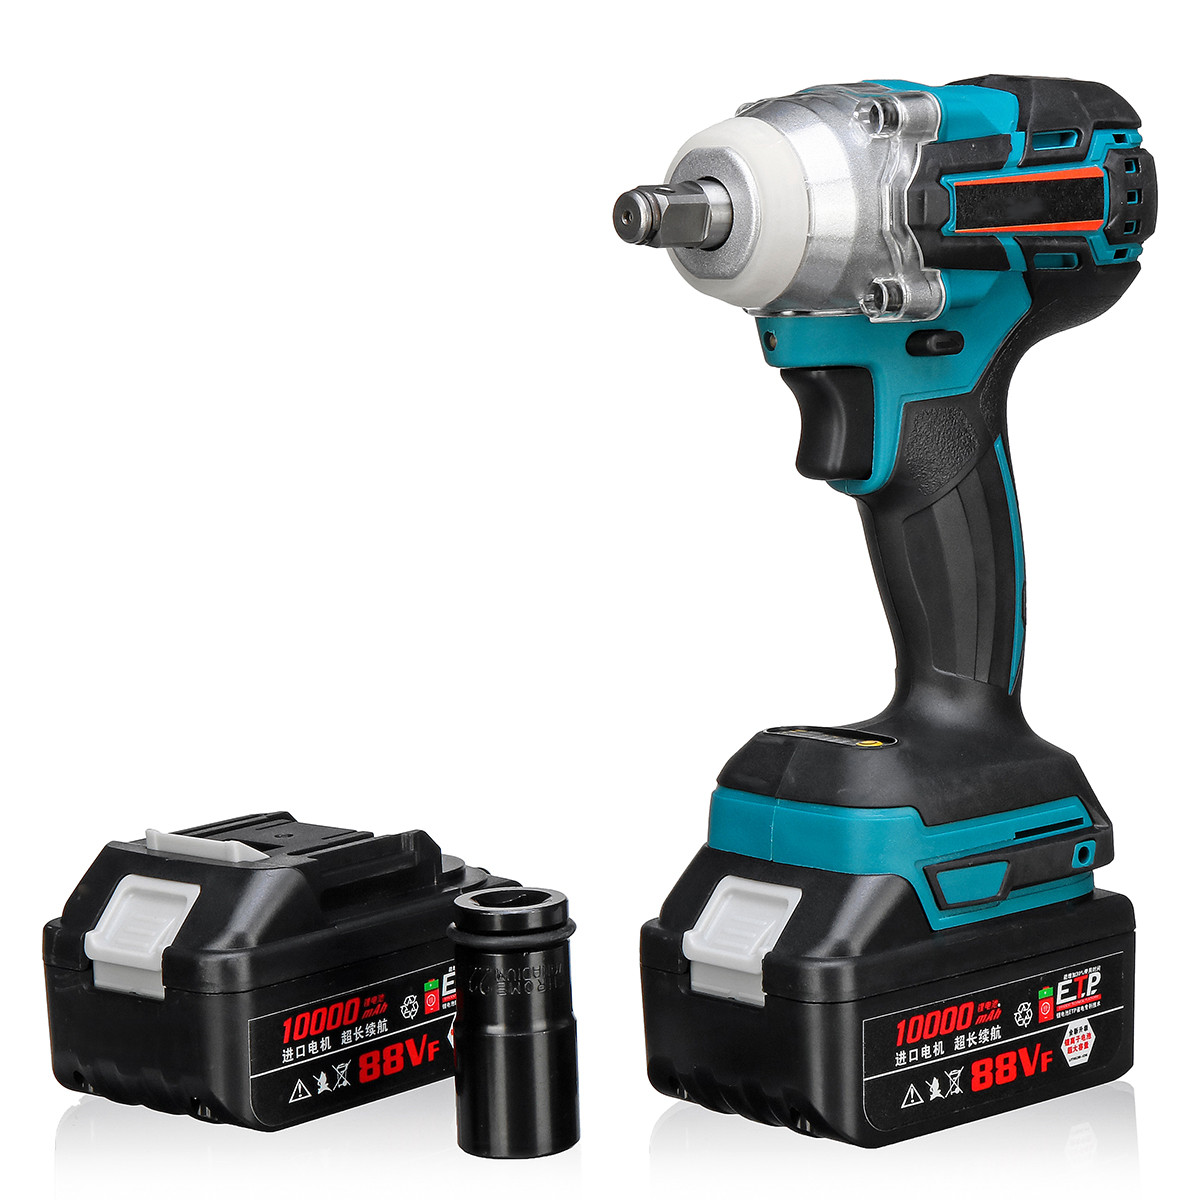 21V-330Nm-10000mAh-Lithium-Electric-Impact-Wrench-Cordless-with-2-Batteries-1399342-9